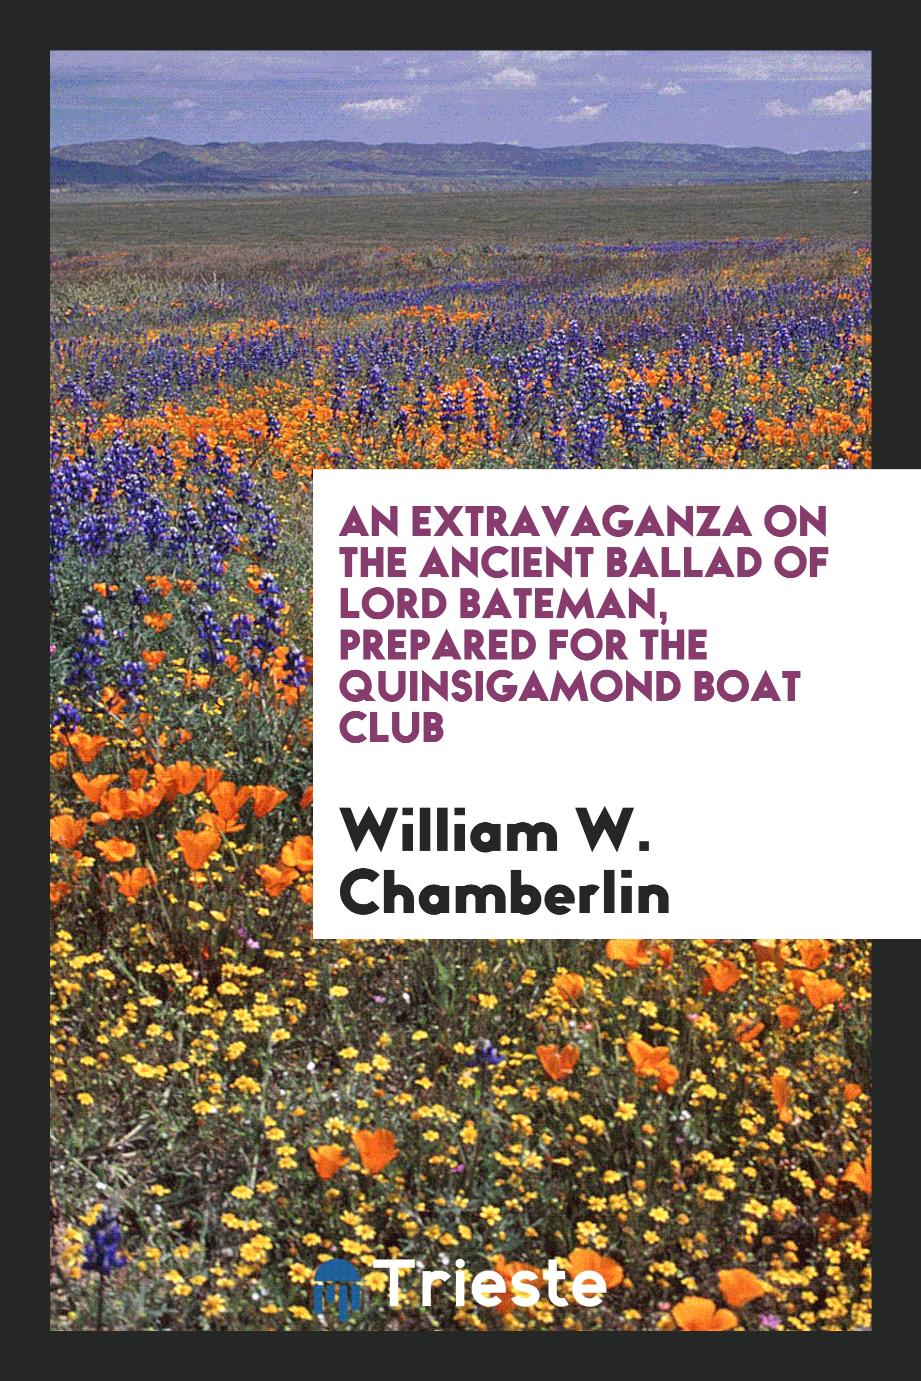 An Extravaganza on the Ancient Ballad of Lord Bateman, prepared for the Quinsigamond Boat Club